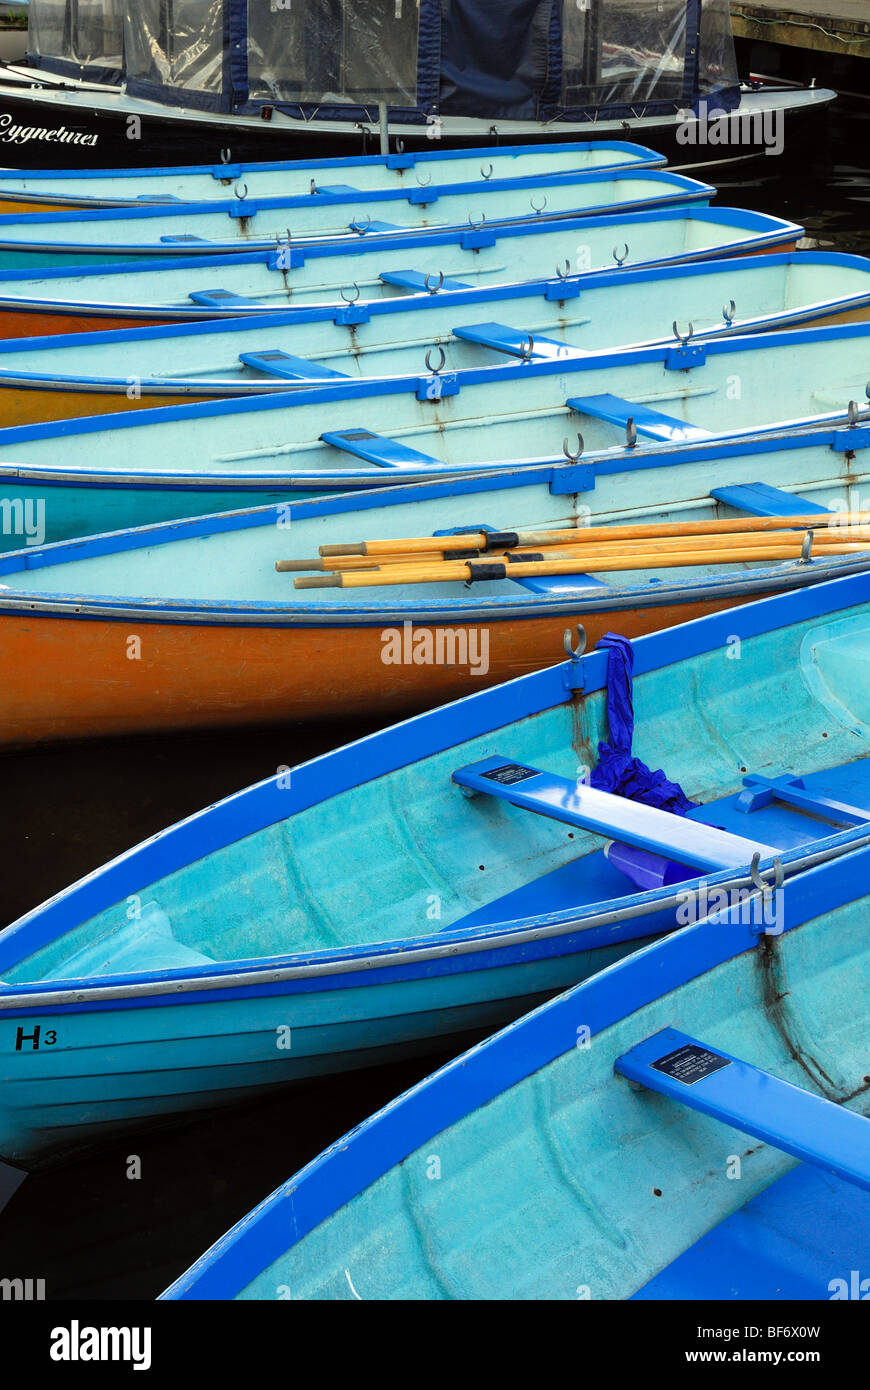 Blue rowing boats Stock Photo